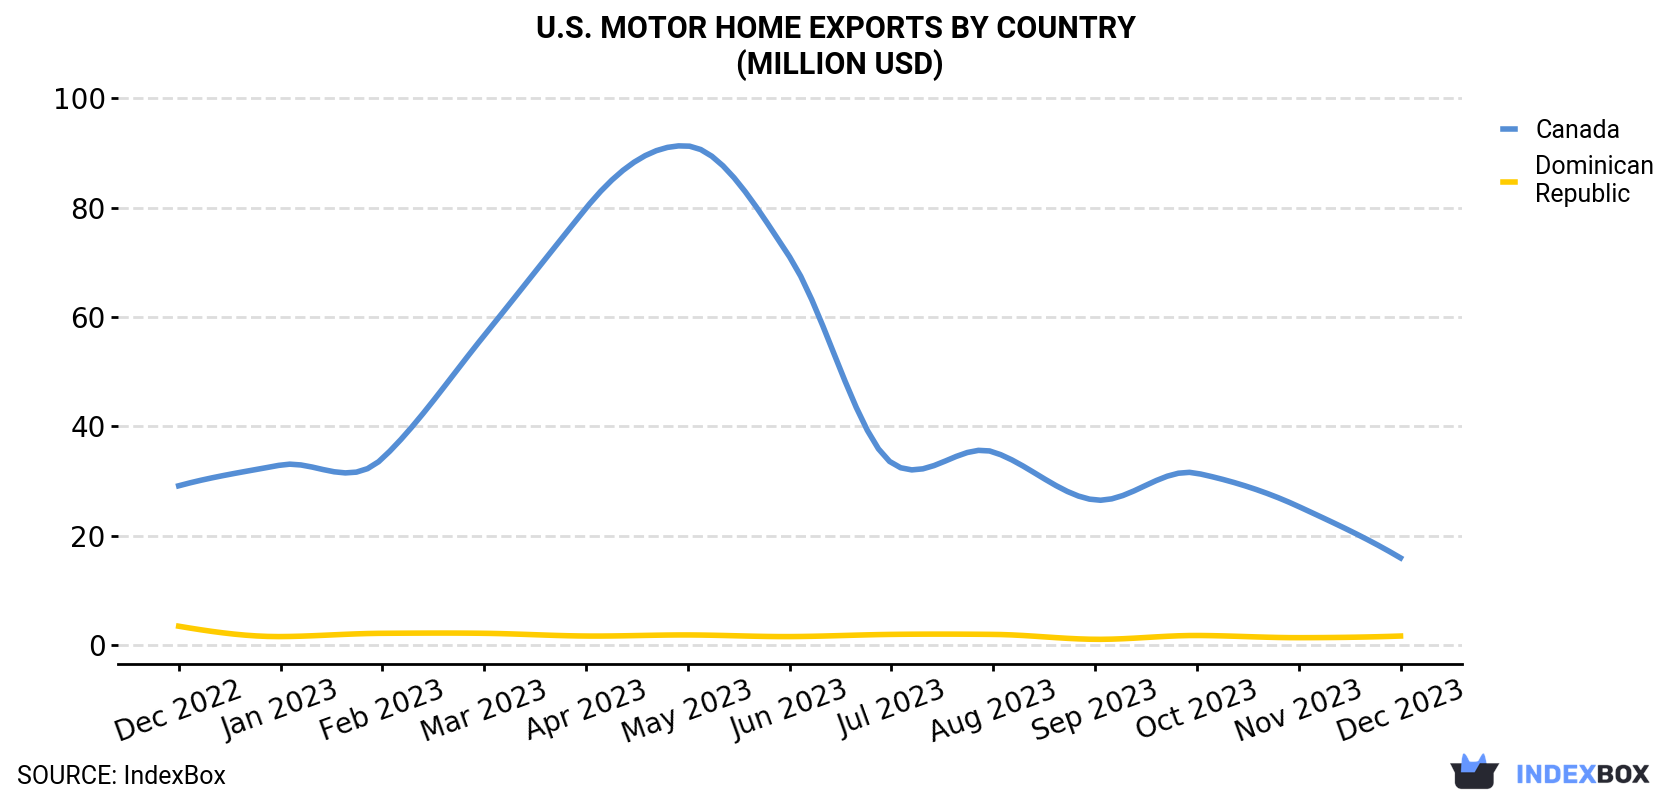 U.S. Motor Home Exports By Country (Million USD)